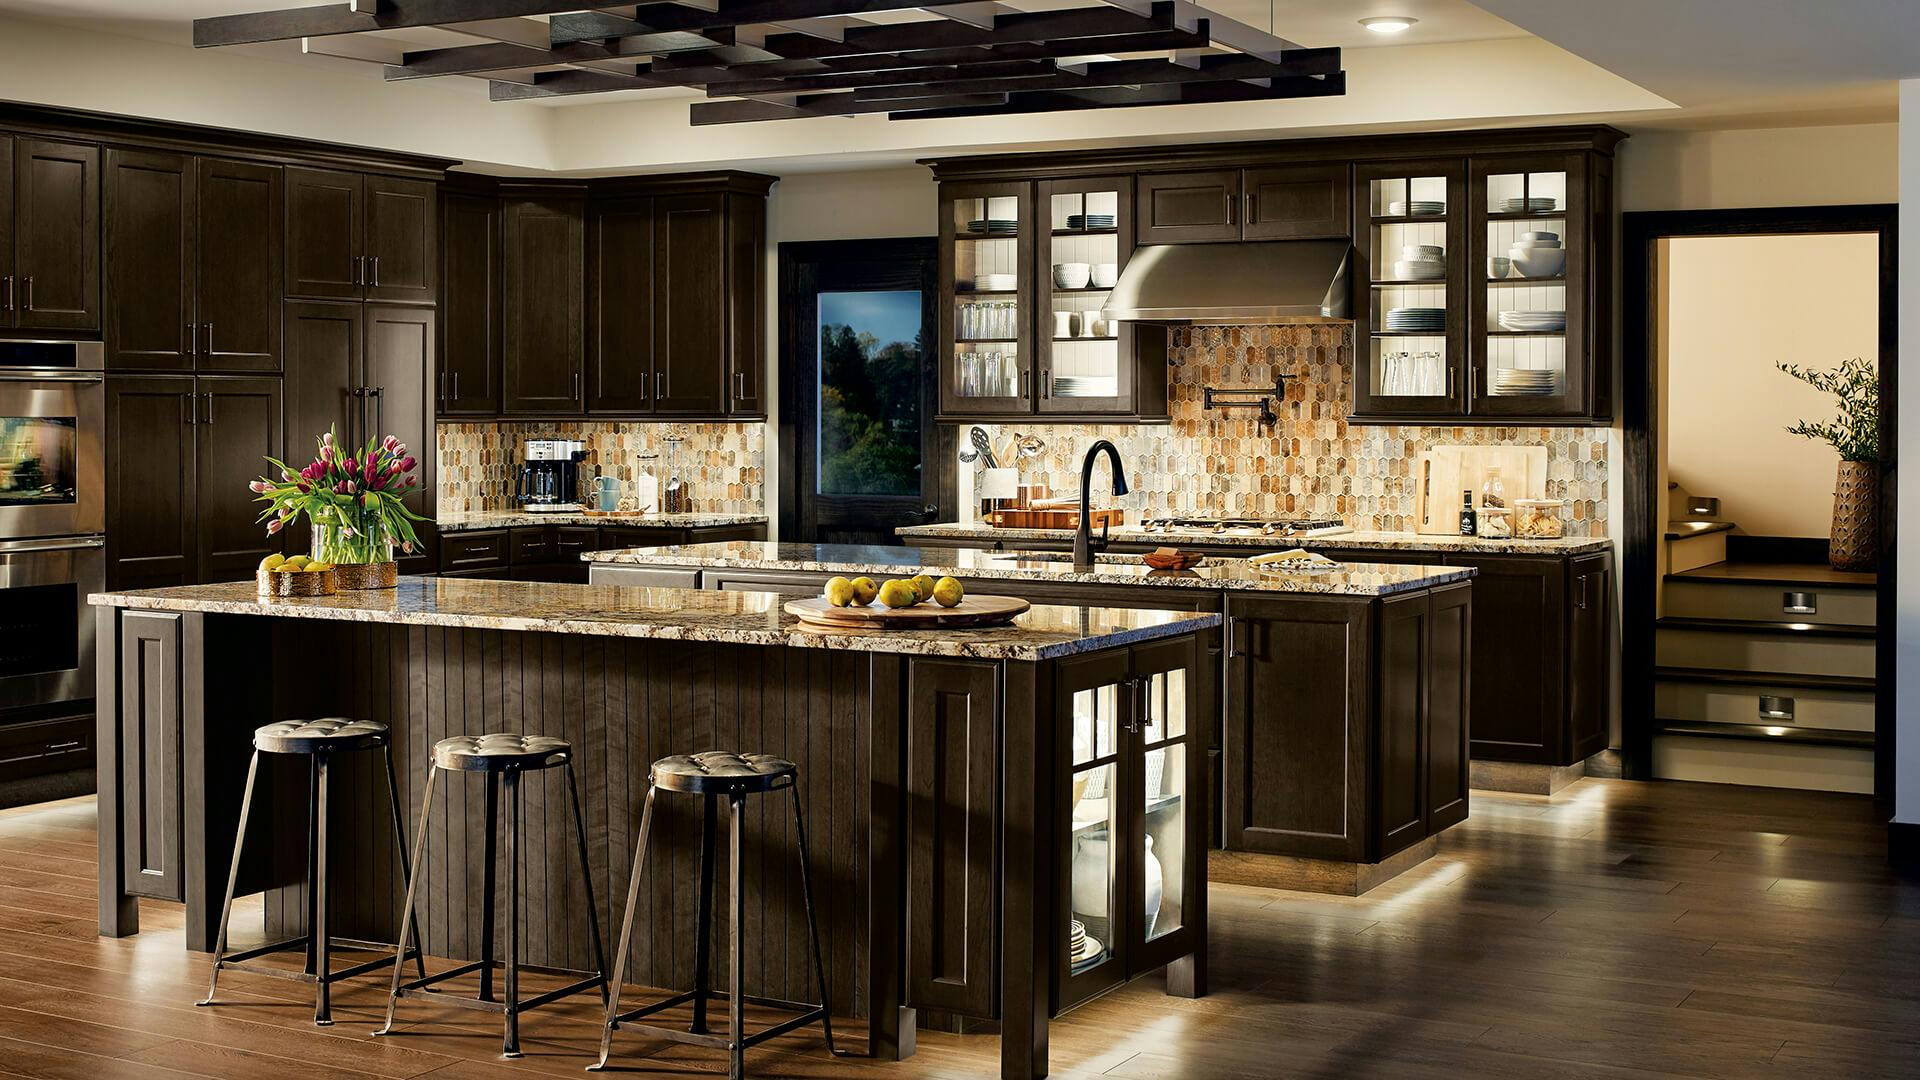 Kitchen with two islands featuring variety of lights above, toe lights and cabinet lights.